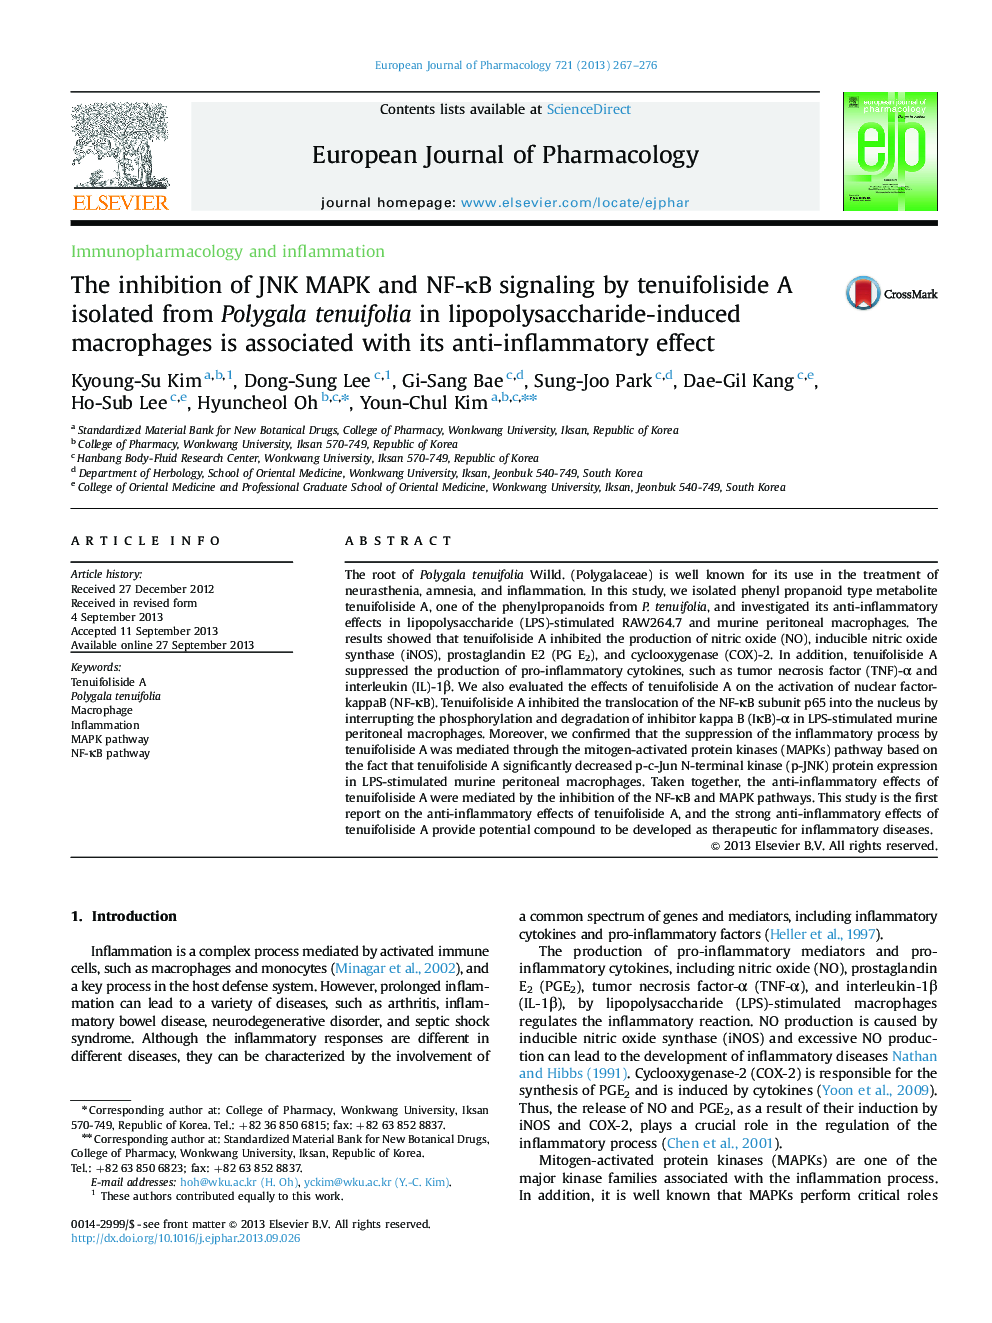 The inhibition of JNK MAPK and NF-ÎºB signaling by tenuifoliside A isolated from Polygala tenuifolia in lipopolysaccharide-induced macrophages is associated with its anti-inflammatory effect